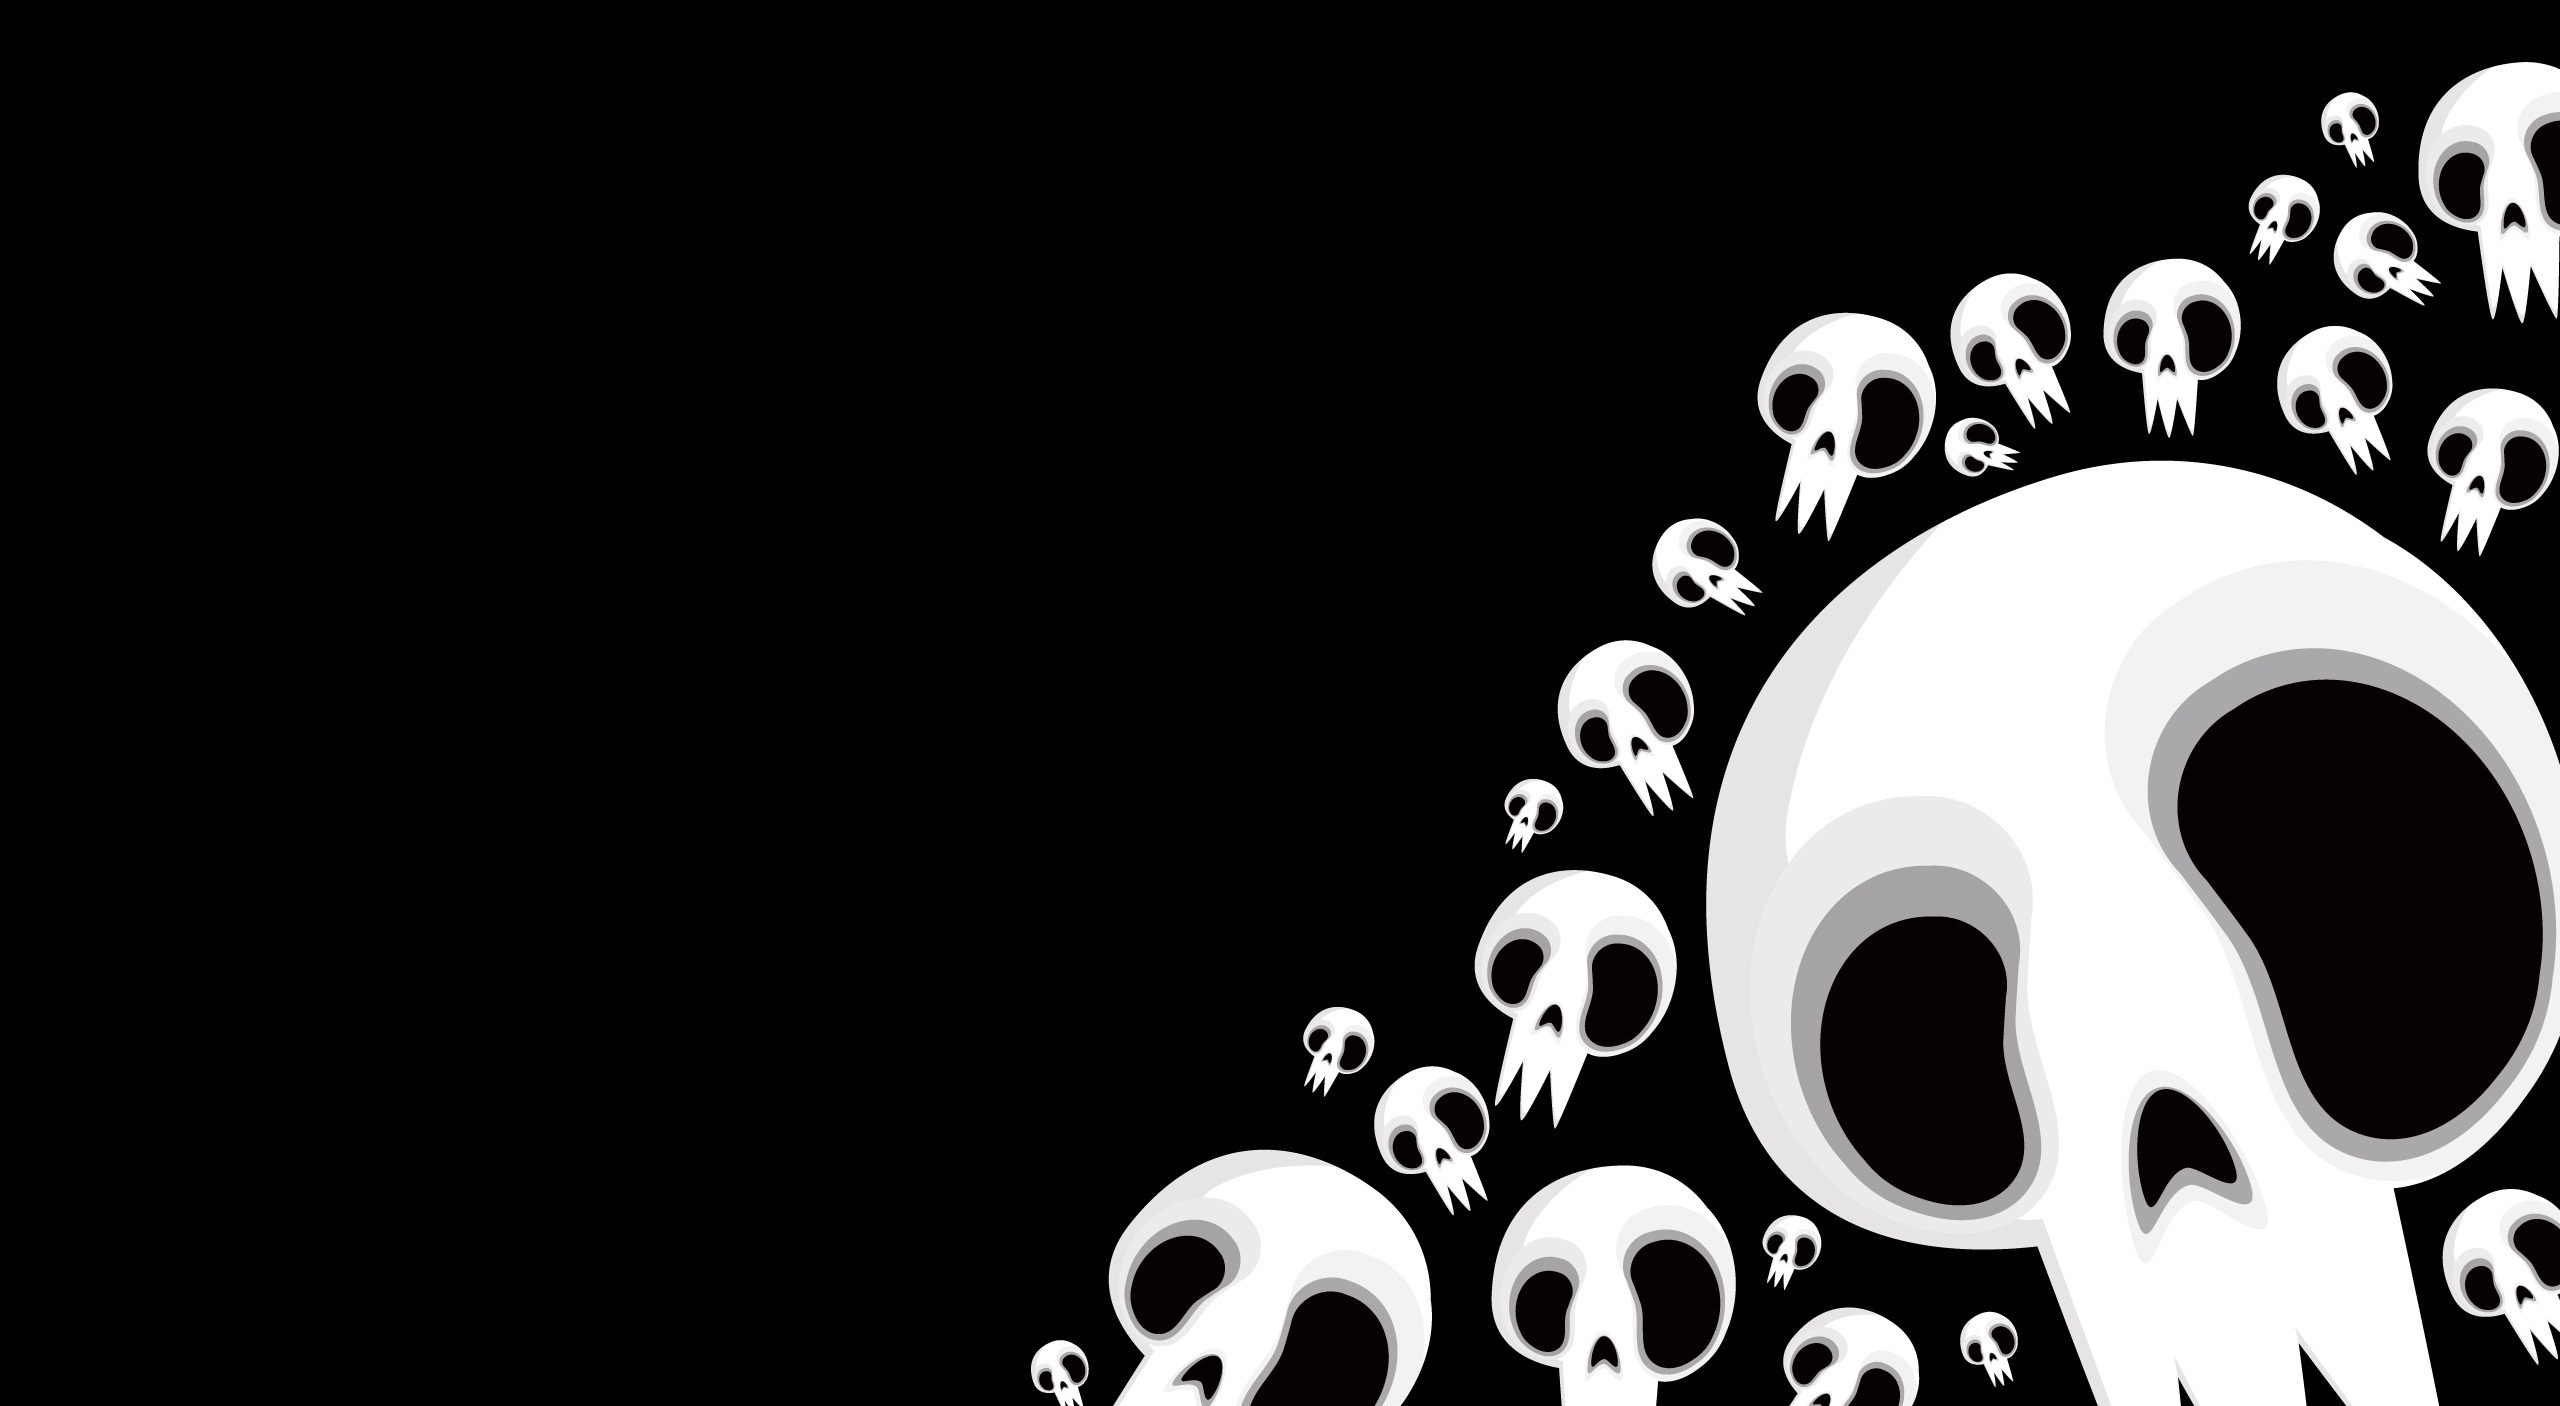 133376 download wallpaper skull, black, white, vector, picture, drawing screensavers and pictures for free